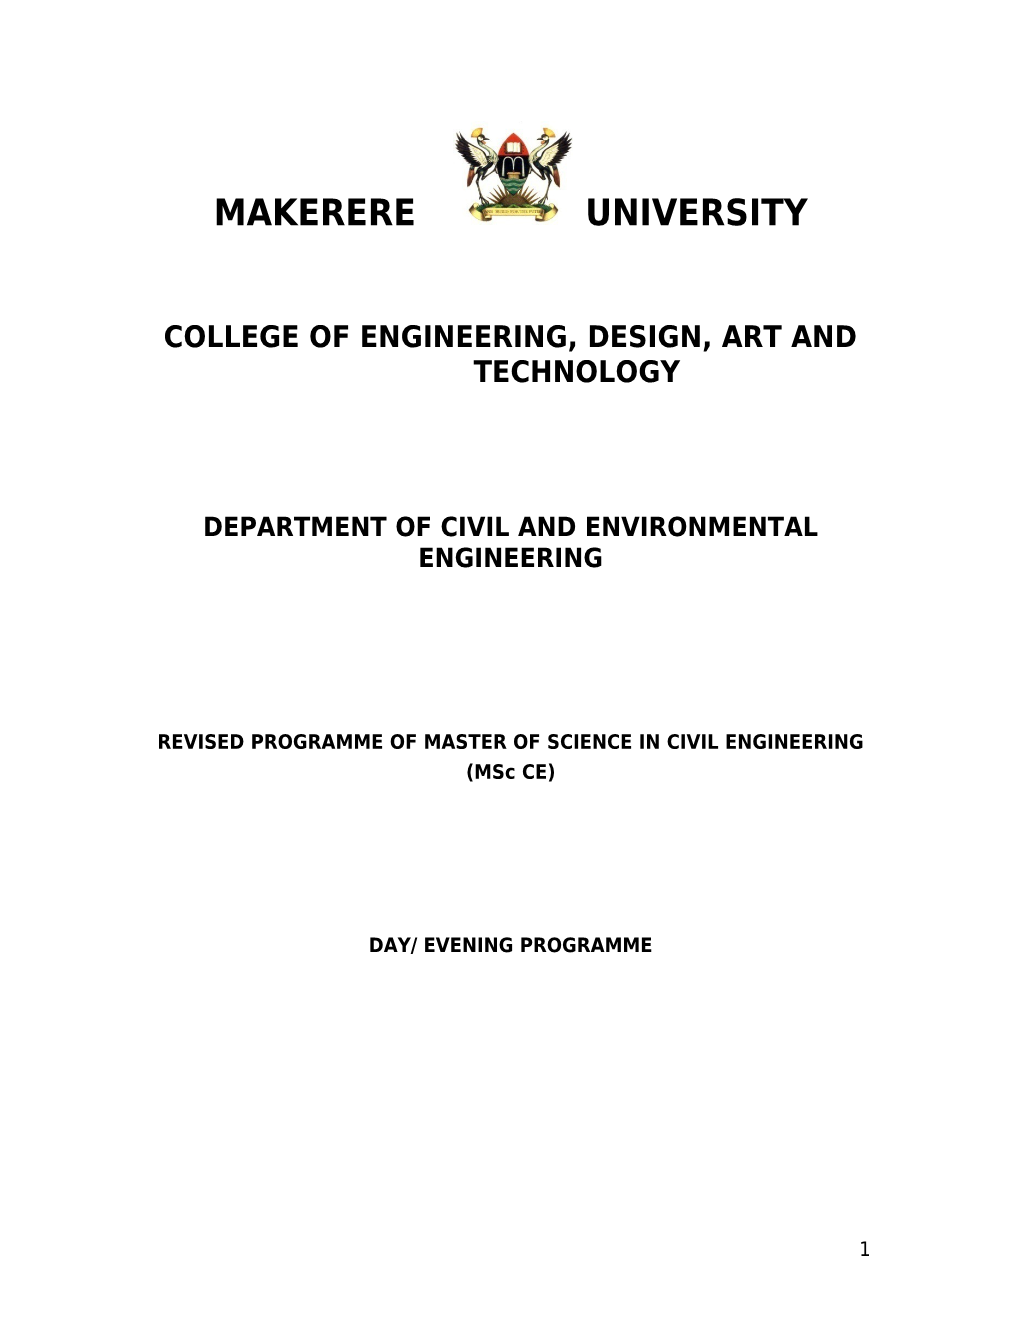 College of Engineering, Design, Art and Technology s1